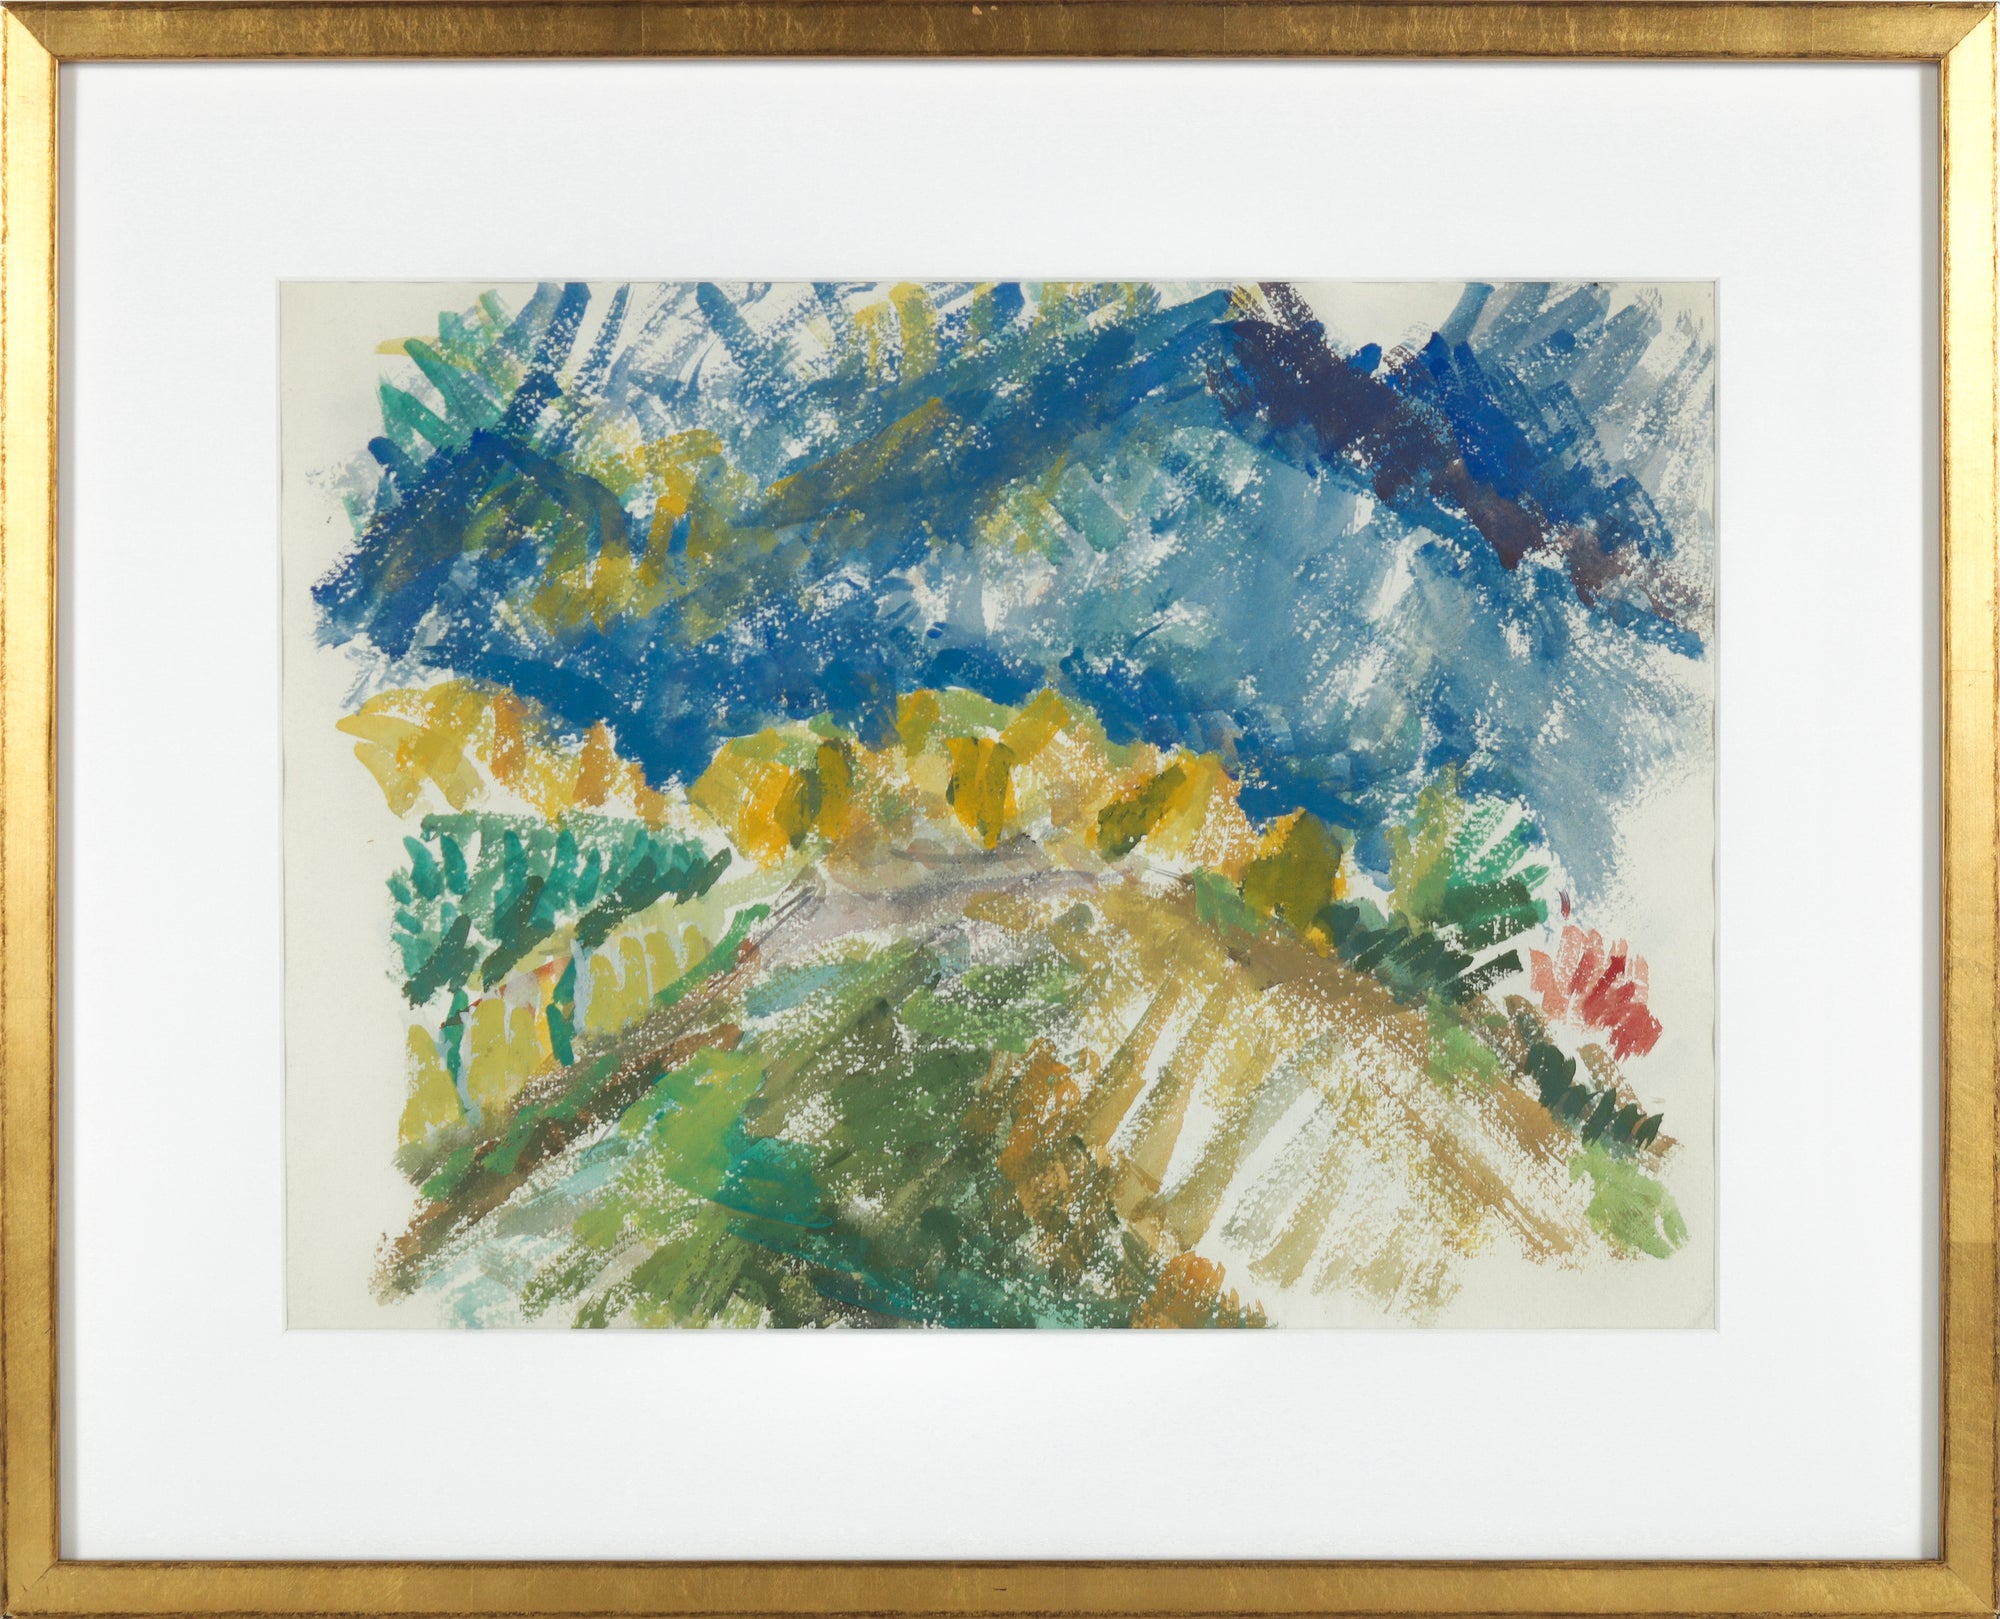 Expressive Landscape with Mountains <br>Early-Mid 20th Century Watercolor <br><br>#13227